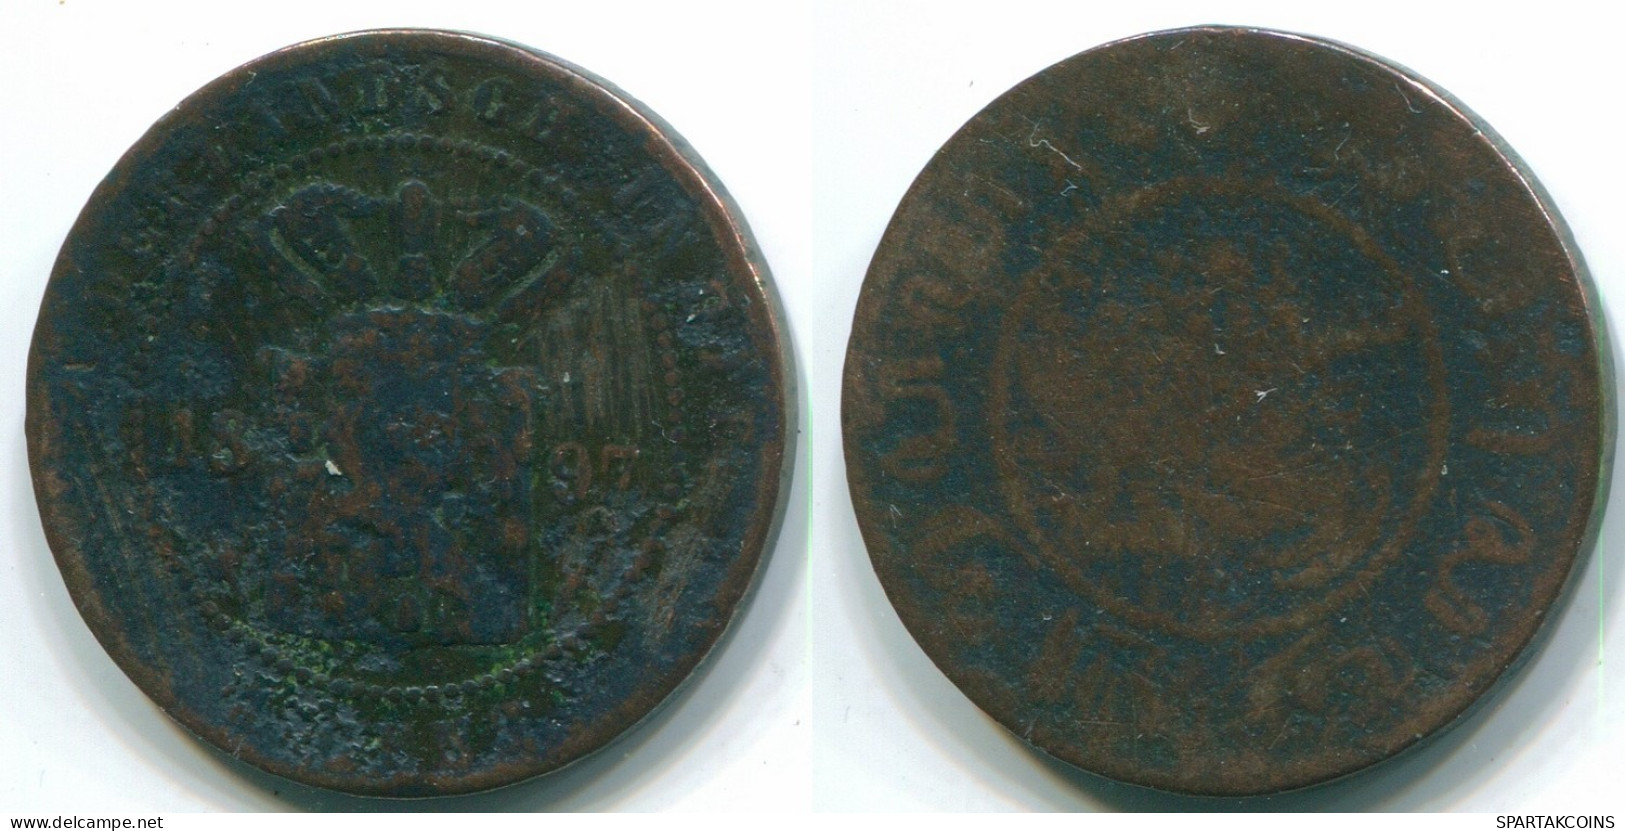 1 CENT 1897 NETHERLANDS EAST INDIES INDONESIA Copper Colonial Coin #S10064.U.A - Indes Néerlandaises